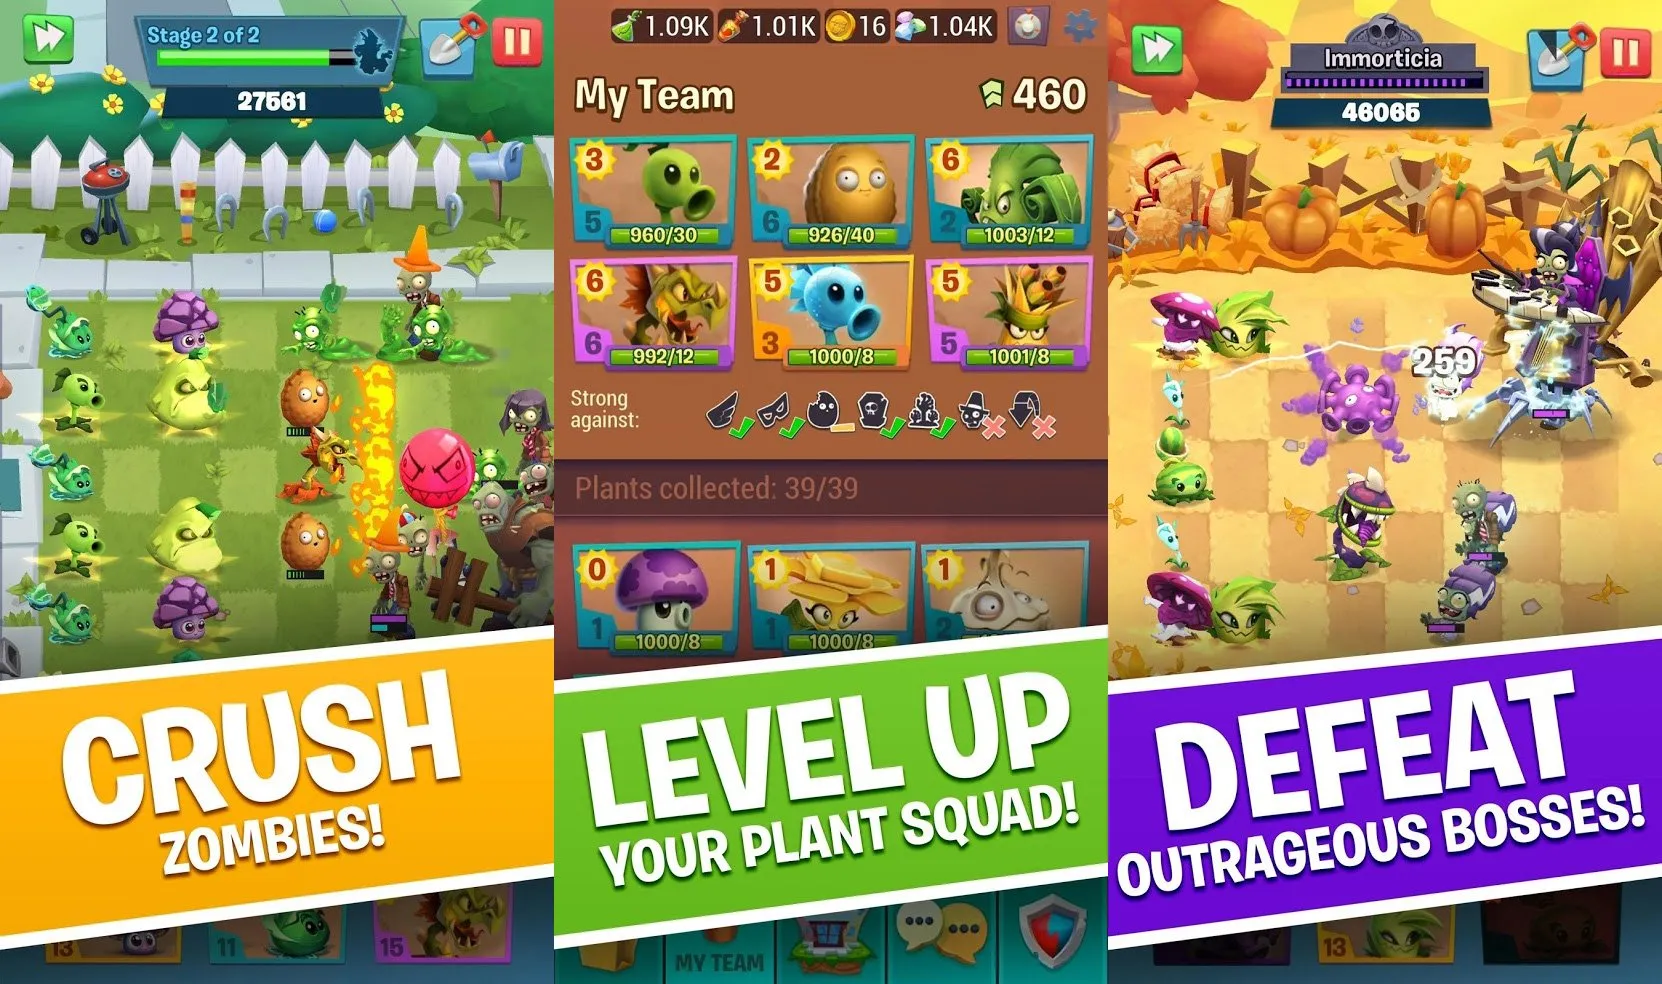 Plants vs. Zombies 2: It's About Time (Mobile, Android, iOS